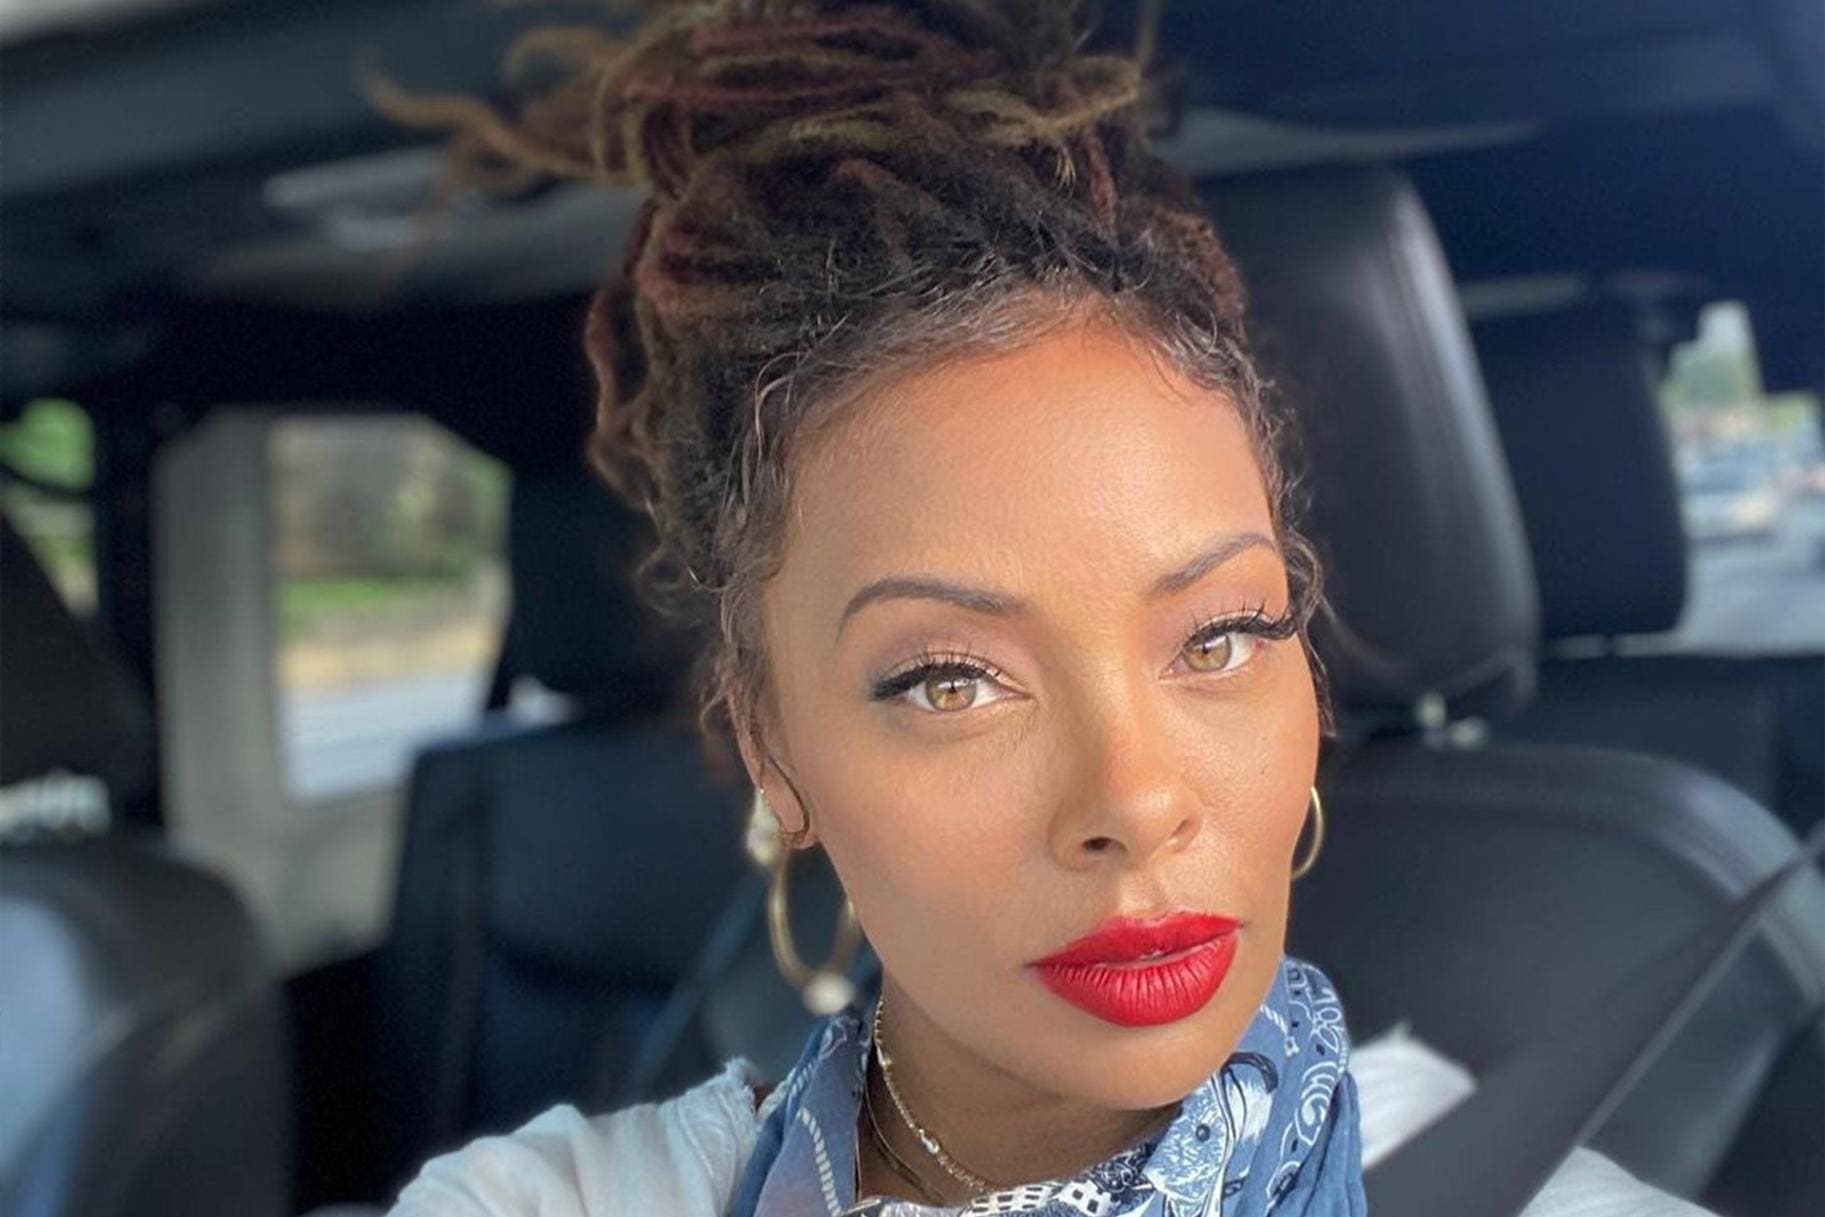 ”eva-marcille-gushes-over-maverick-sterling-and-shares-the-cutest-photo-of-him”